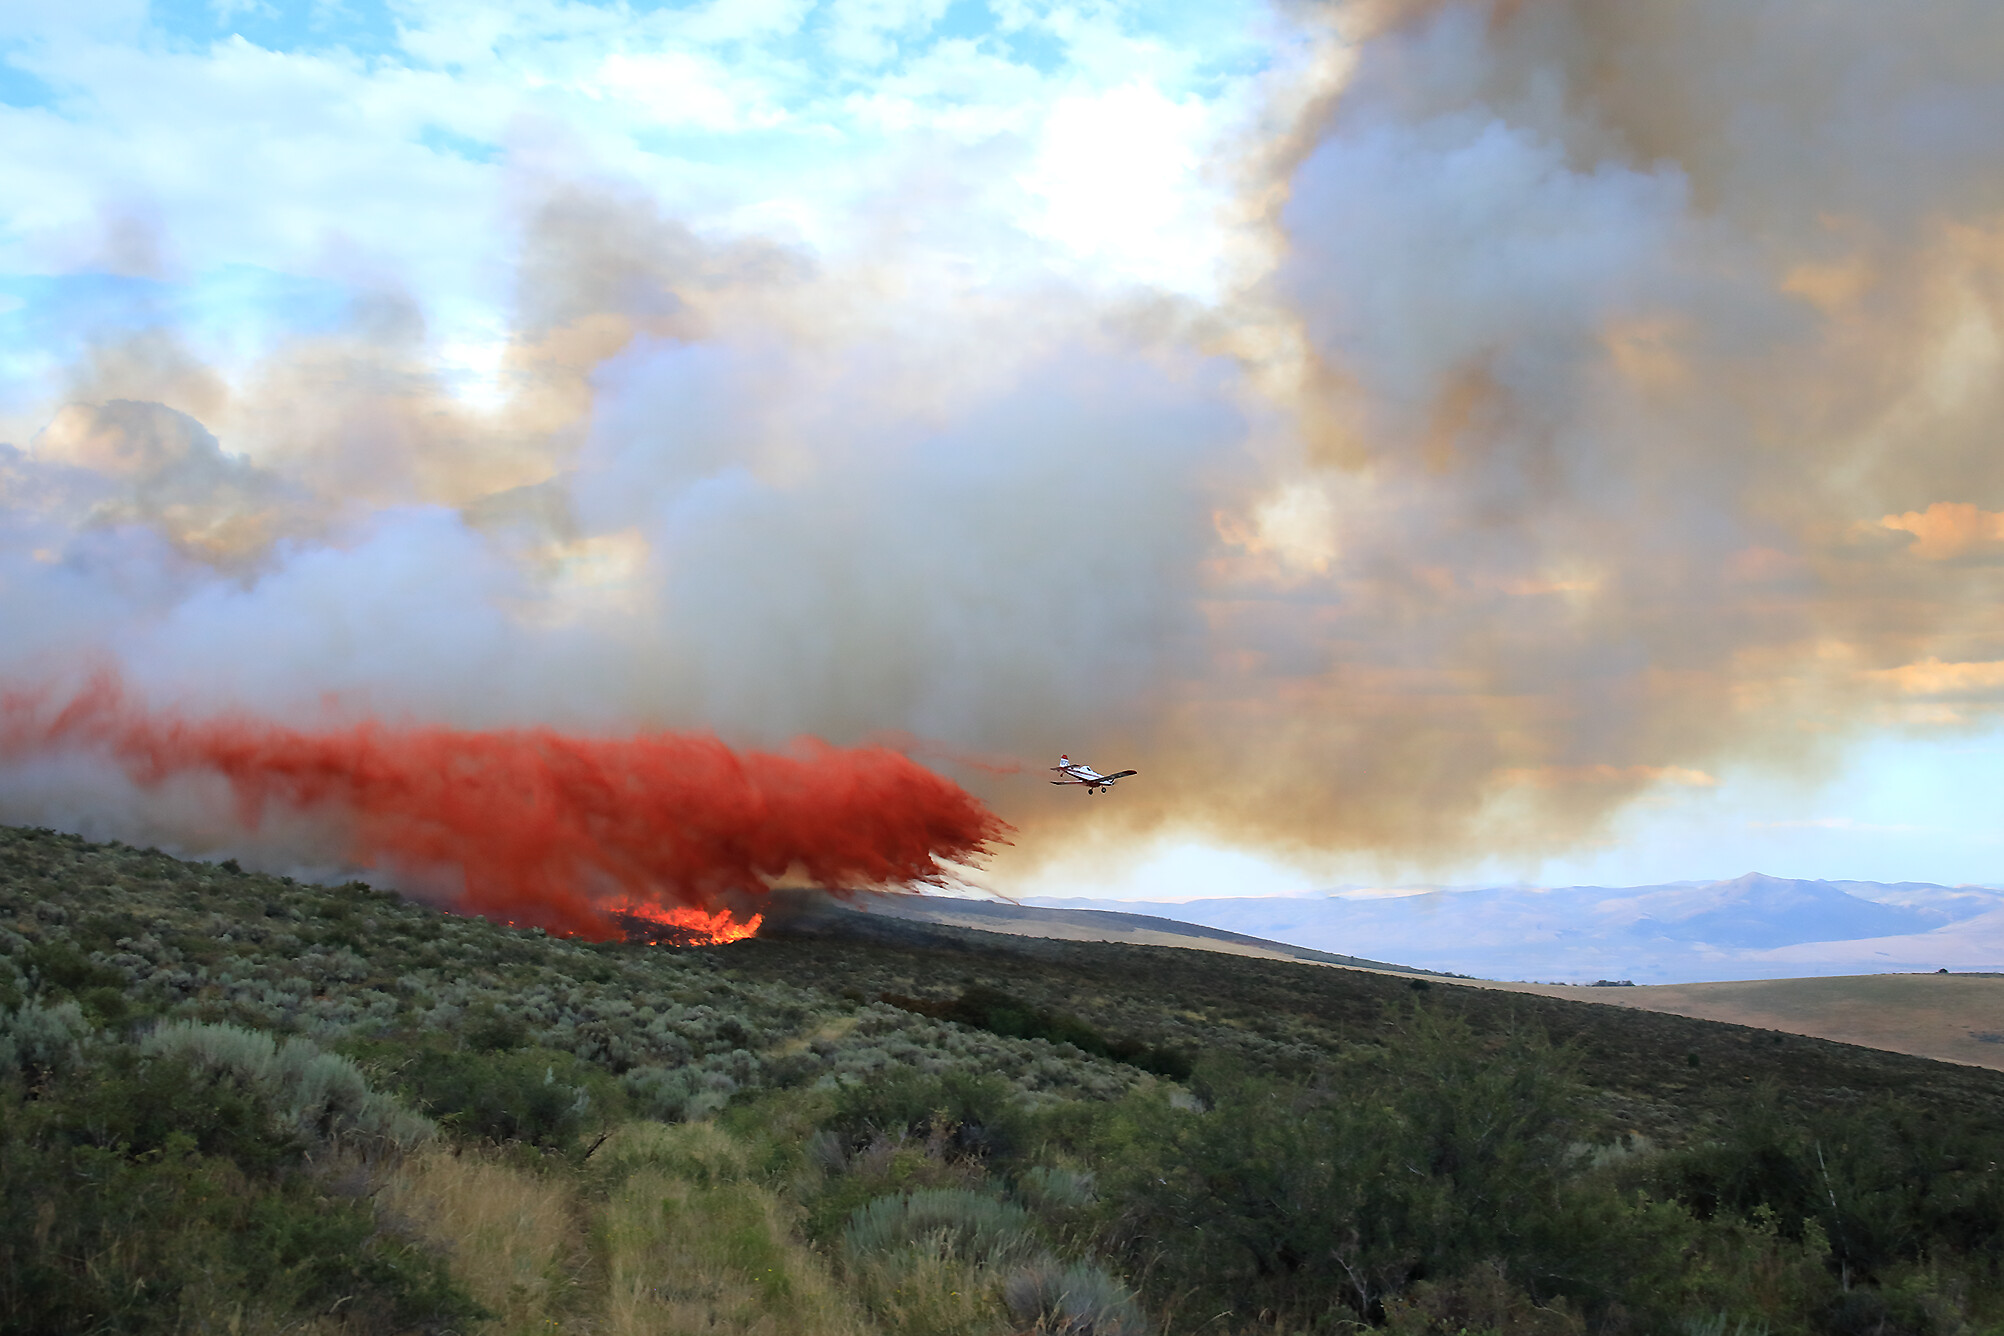 Photograph of an airplane dropping fire retardant on the Ross Fork Fire in Idaho, 2022. The photo shows a small white plane flying over a hilly landscape covered with scrub. On the nearest hill, orange flames from a fire can be seen. The plane is dropping a red substance over the flames. Gray-brown smoke can be seen in the background.